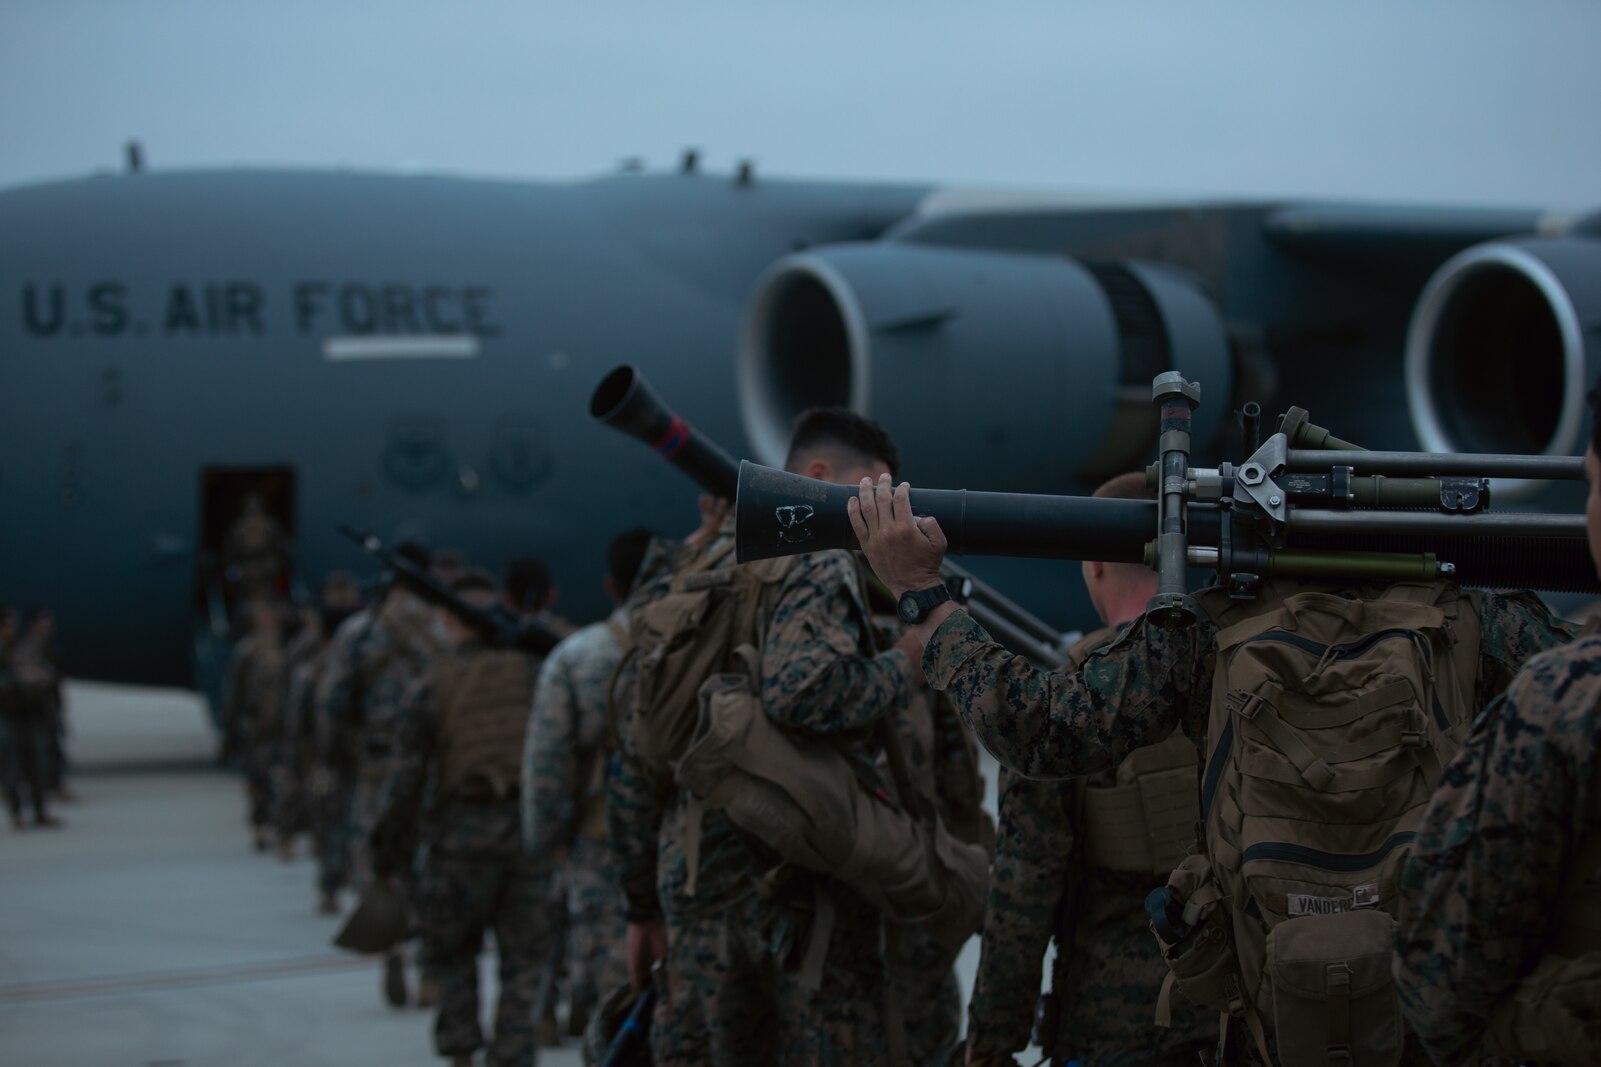 1st Marine Division exercise to enhance their expeditionary operations in a joint-training environment. This was the first time MCAS Camp Pendleton staged five Globemaster III aircraft on the air station at the same time.